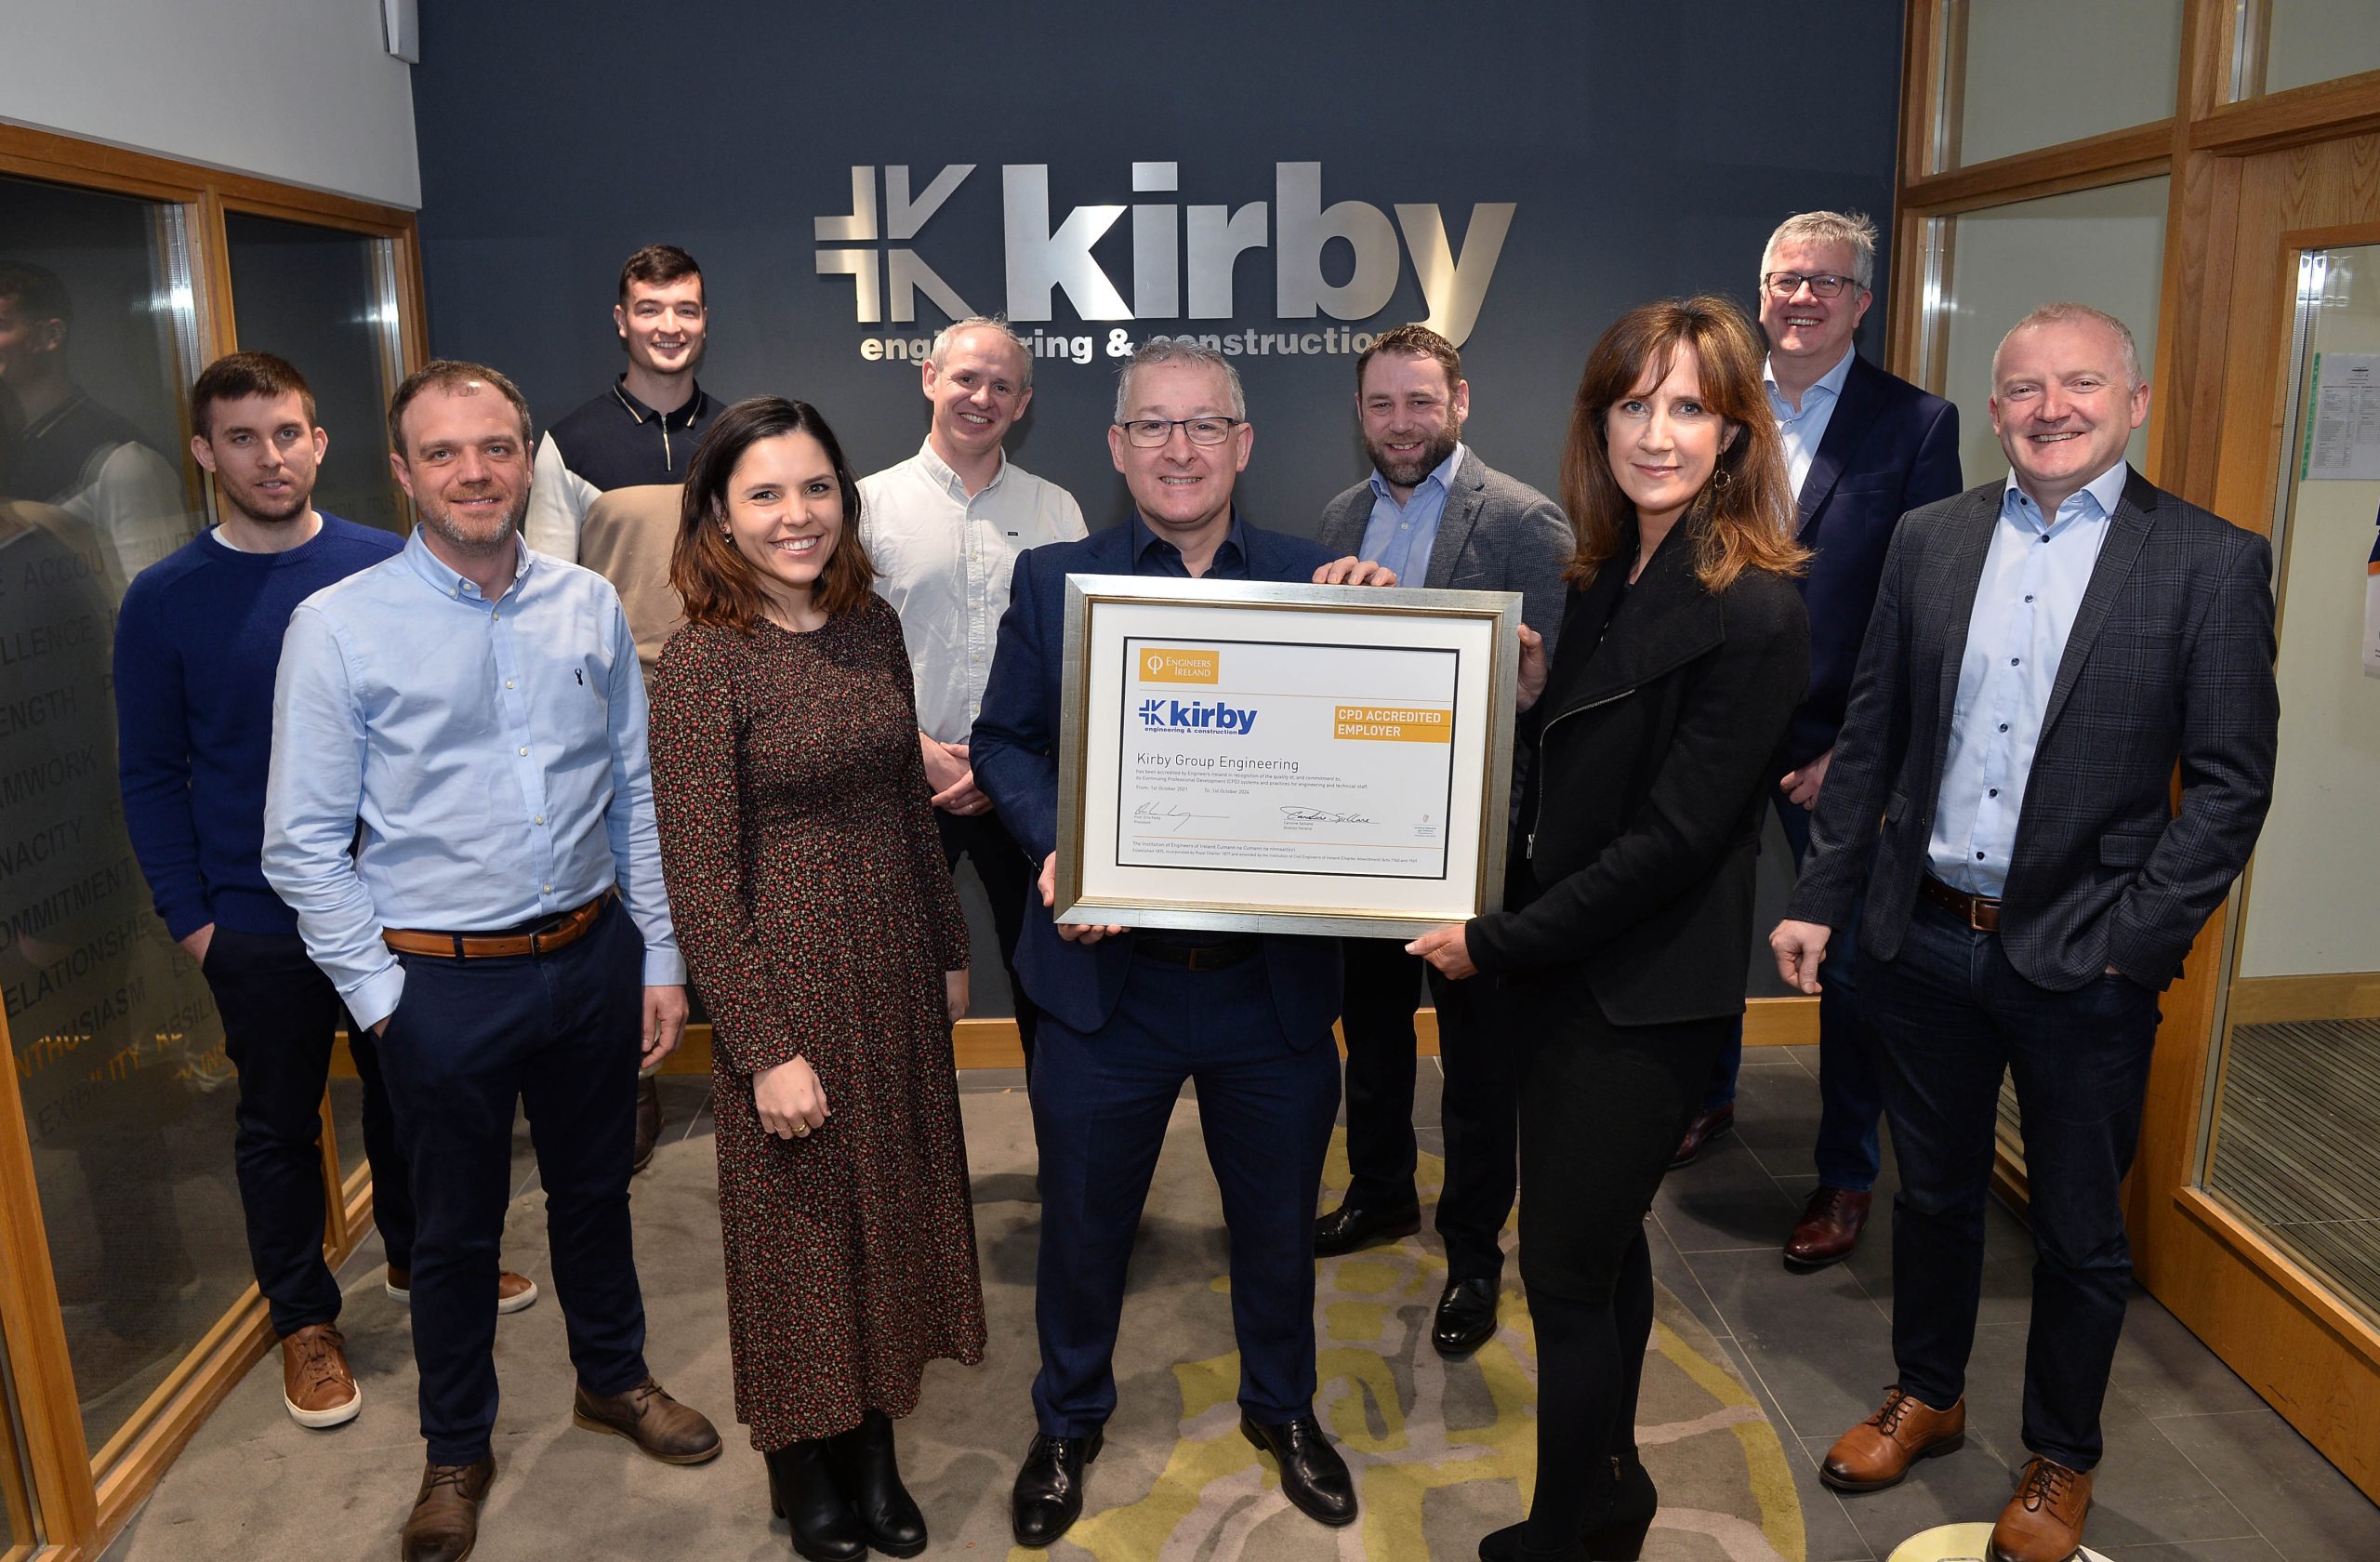 Kirby Group Engineering has been awarded the much sought after CPD Accredited Employer Standard by Engineers Ireland in recognition of their continuing professional development (CPD) strategy. Pictured during the announcement at Kirby’s Galway office are: l - r David Duggan - Electrical Project Engineer, Kirby; Paul Dickinson - Mechanical Engineer, Kirby; Kyle Hayes - HR / Training Officer, Kirby; Melandri Van Zyl, HR Officer, Kirby; Aaron Reilly - Senior Mechanical Engineer, Kirby; Mark Flanagan – Group Managing Director, Kirby; Eoghan Hegerty - Electrical Engineering Manager, Kirby; Caroline Spillane - Director General, Engineers Ireland; Sean Meagher - Associate Director – Commercial, Kirby; John Grogan - Group Engineering Director, Kirby